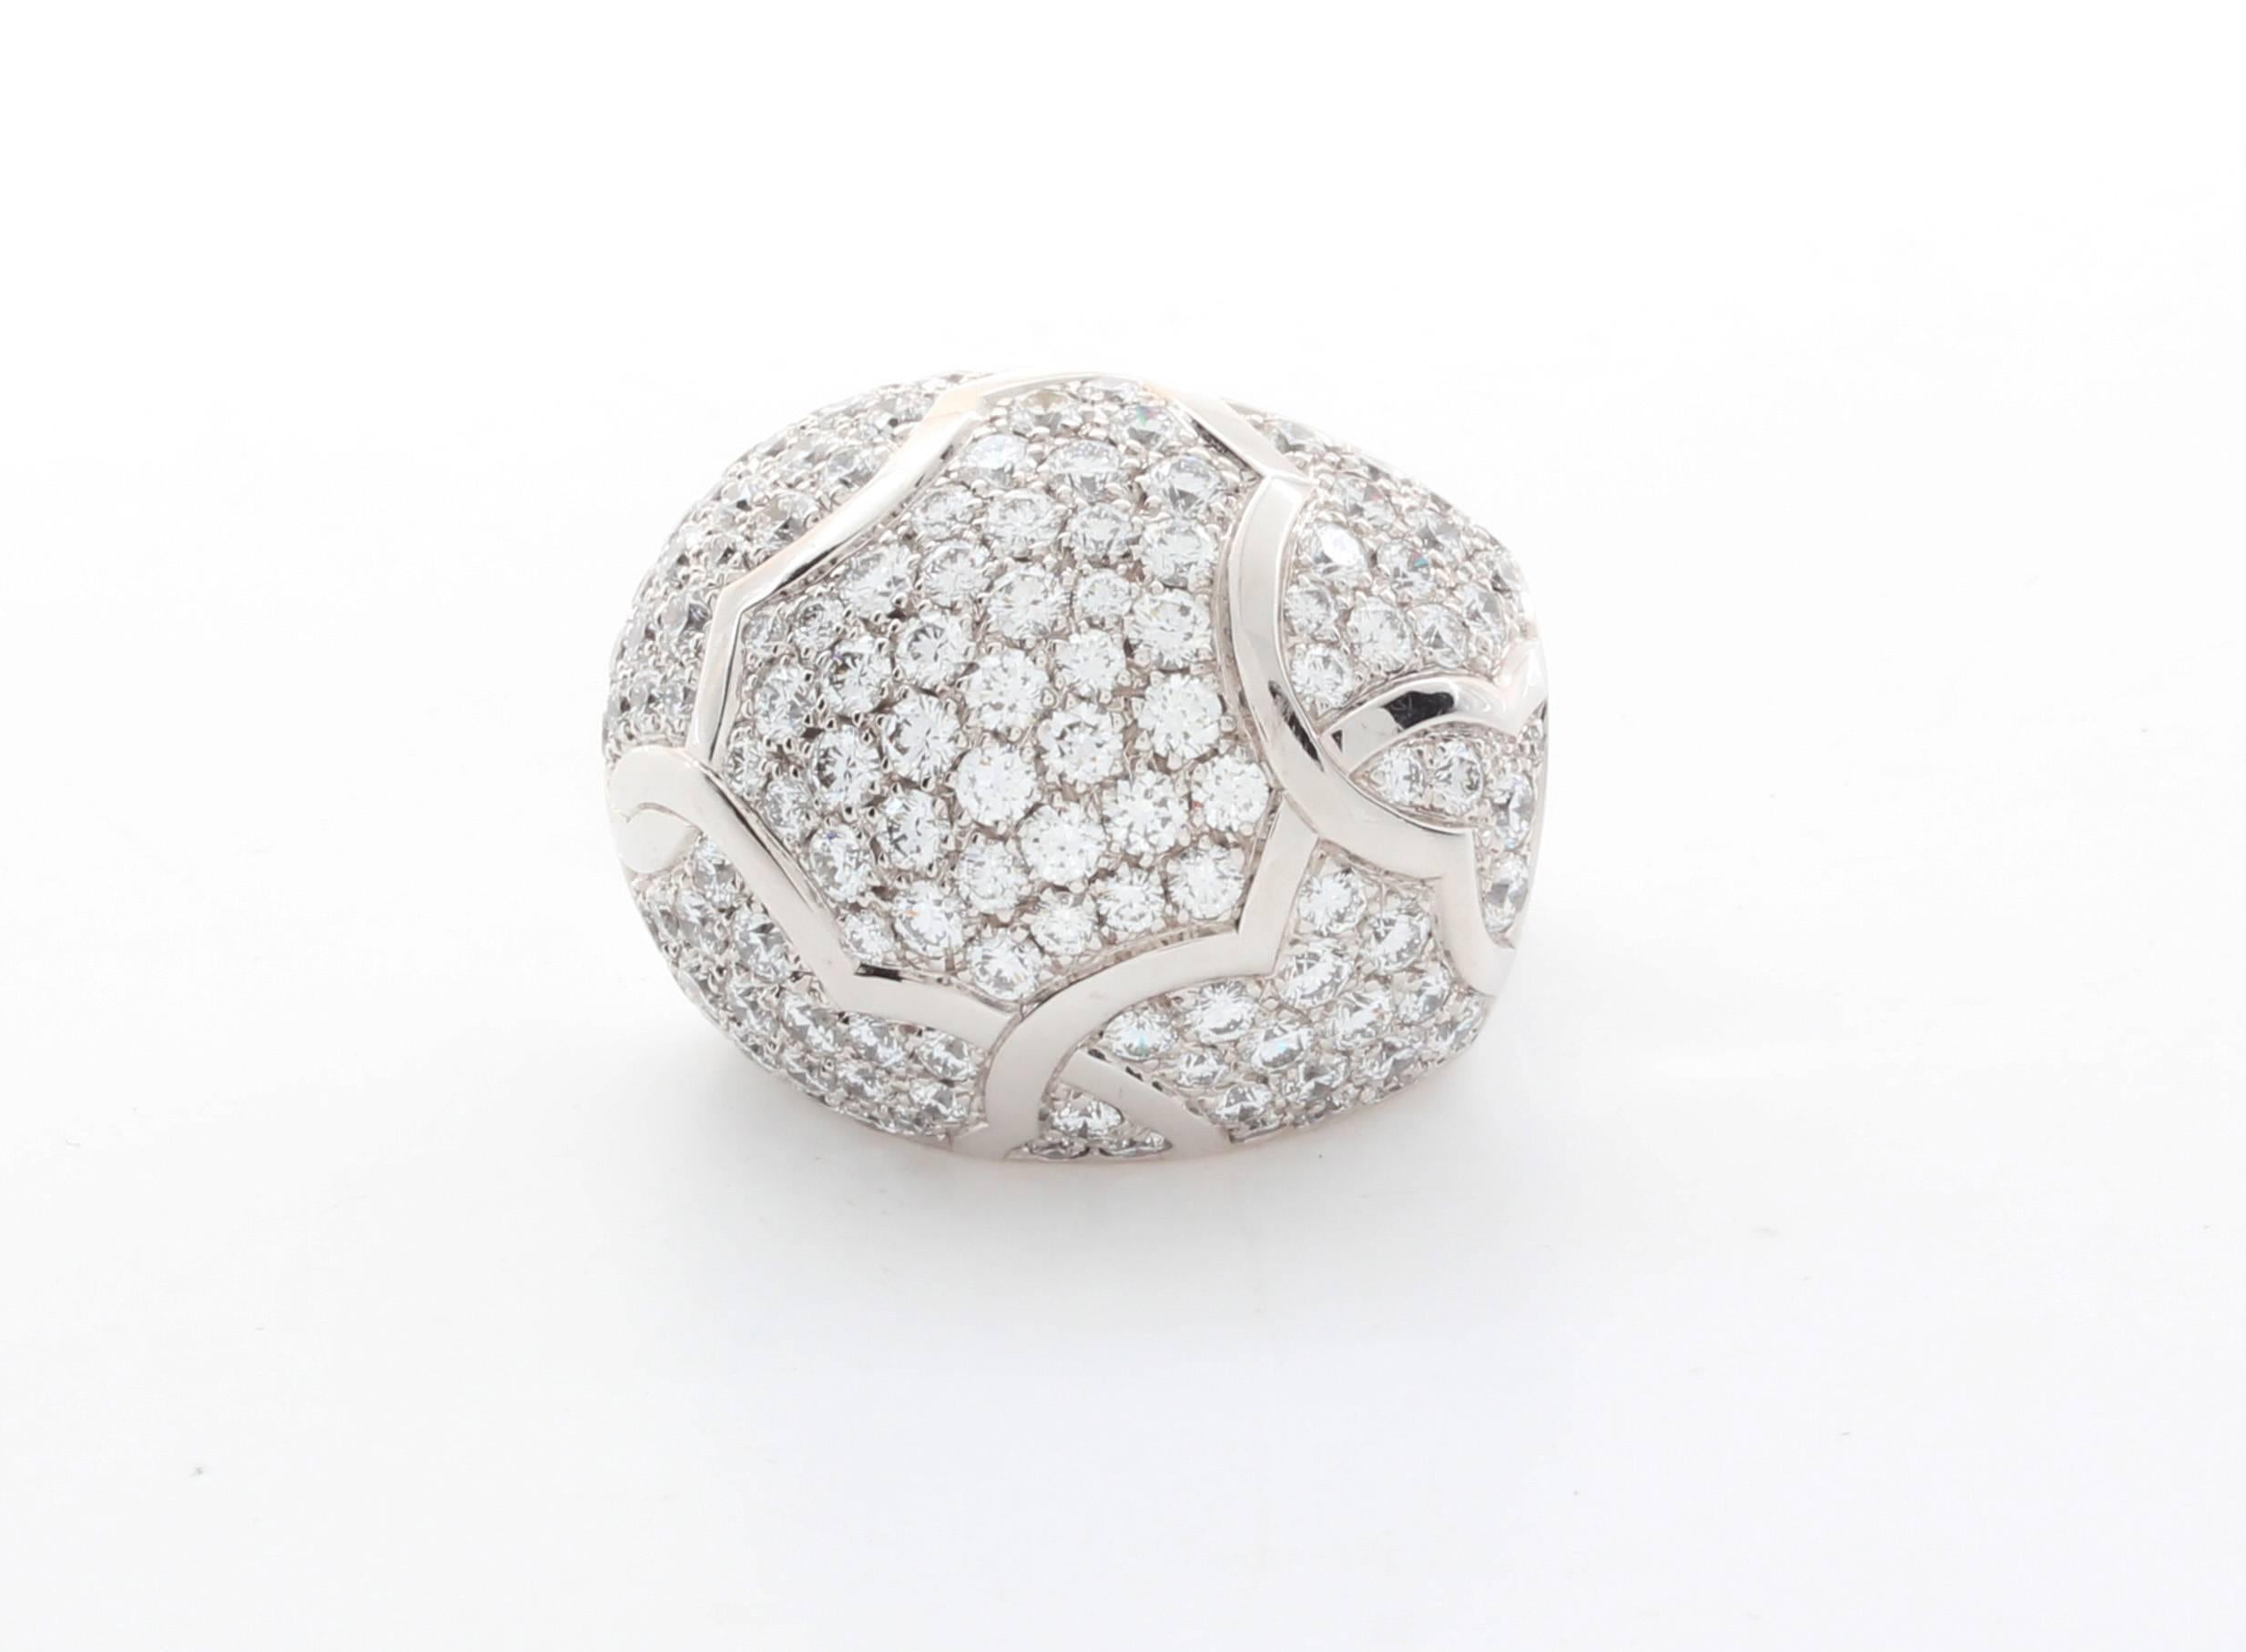 Chanel Diamond Pave Dome Ring in 18K White Gold. Total Diamond Weight 3.80ct., Size: US 5.25 / EUR 50, Signed: 